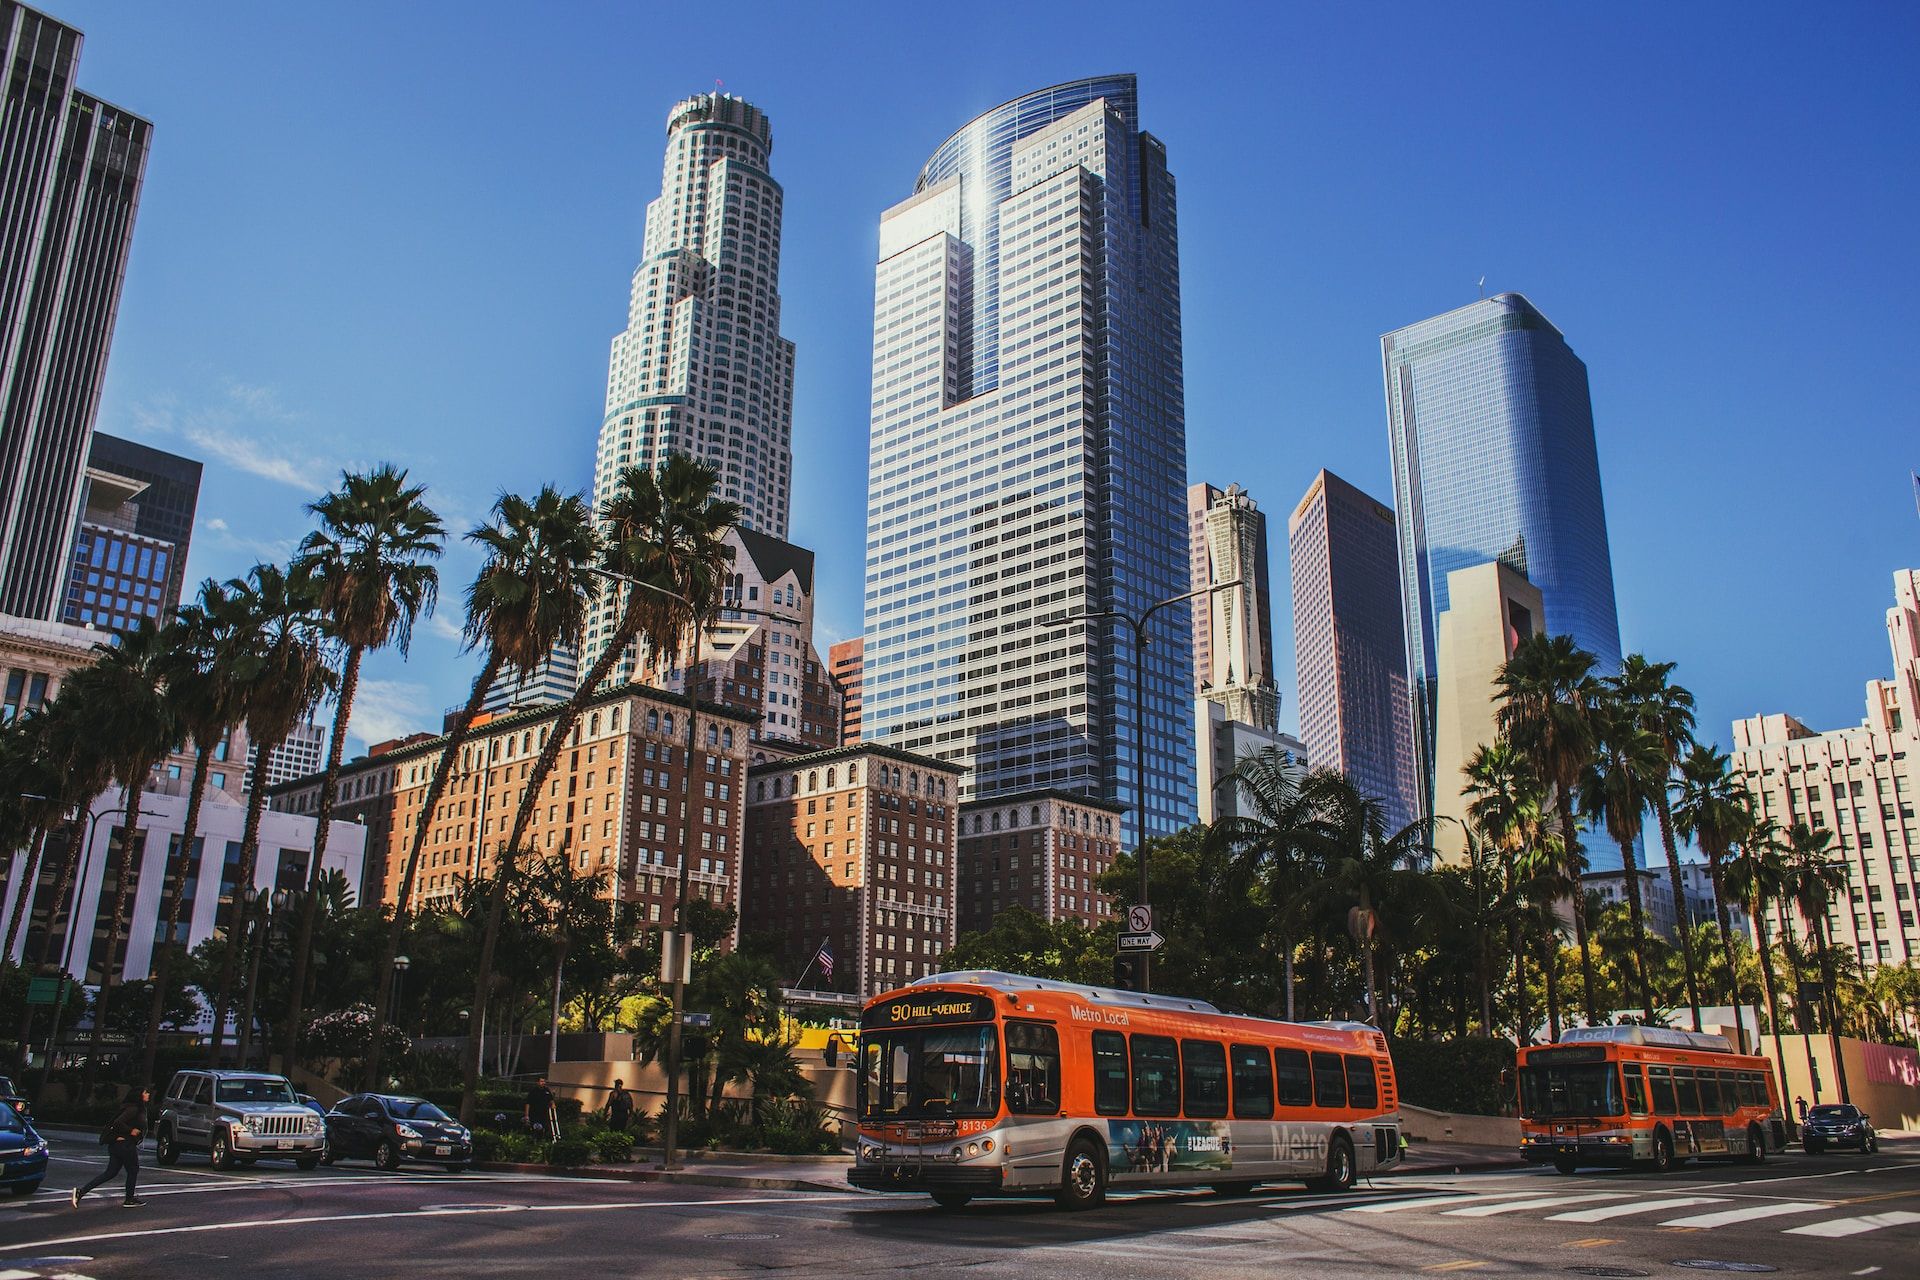 A bus in downtown Los Angeles, California